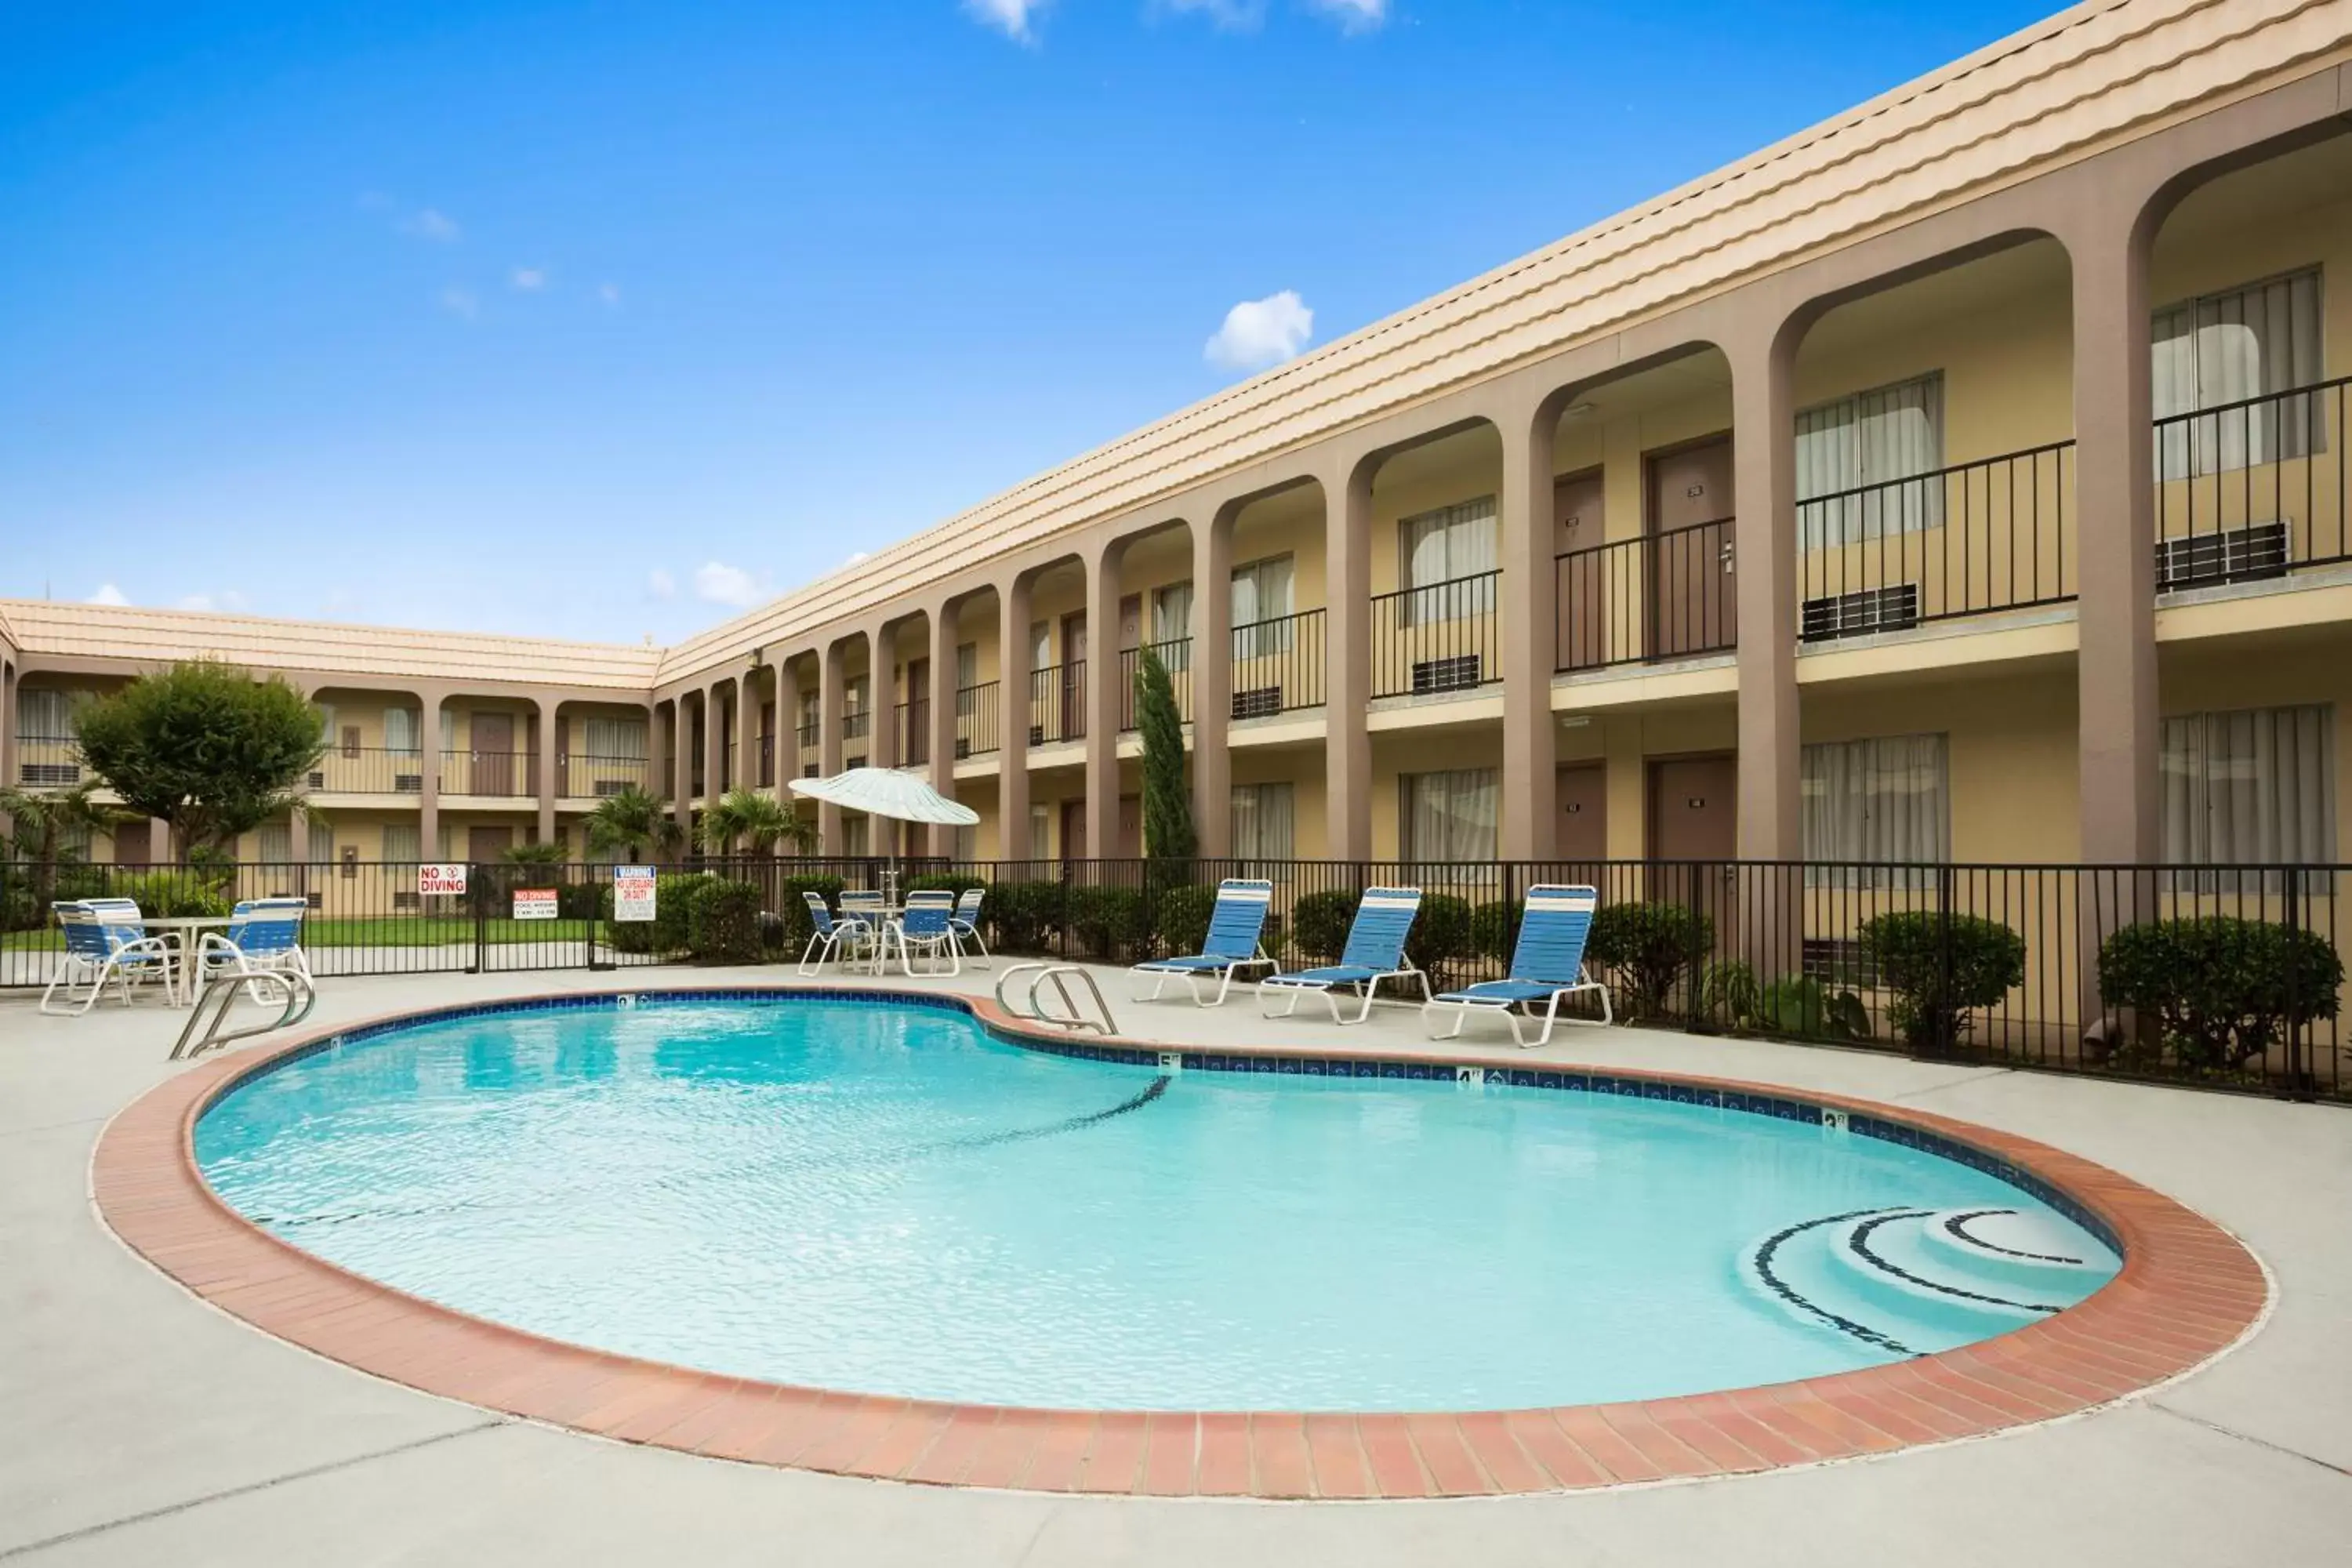 Swimming pool, Property Building in Days Inn by Wyndham Dallas Irving